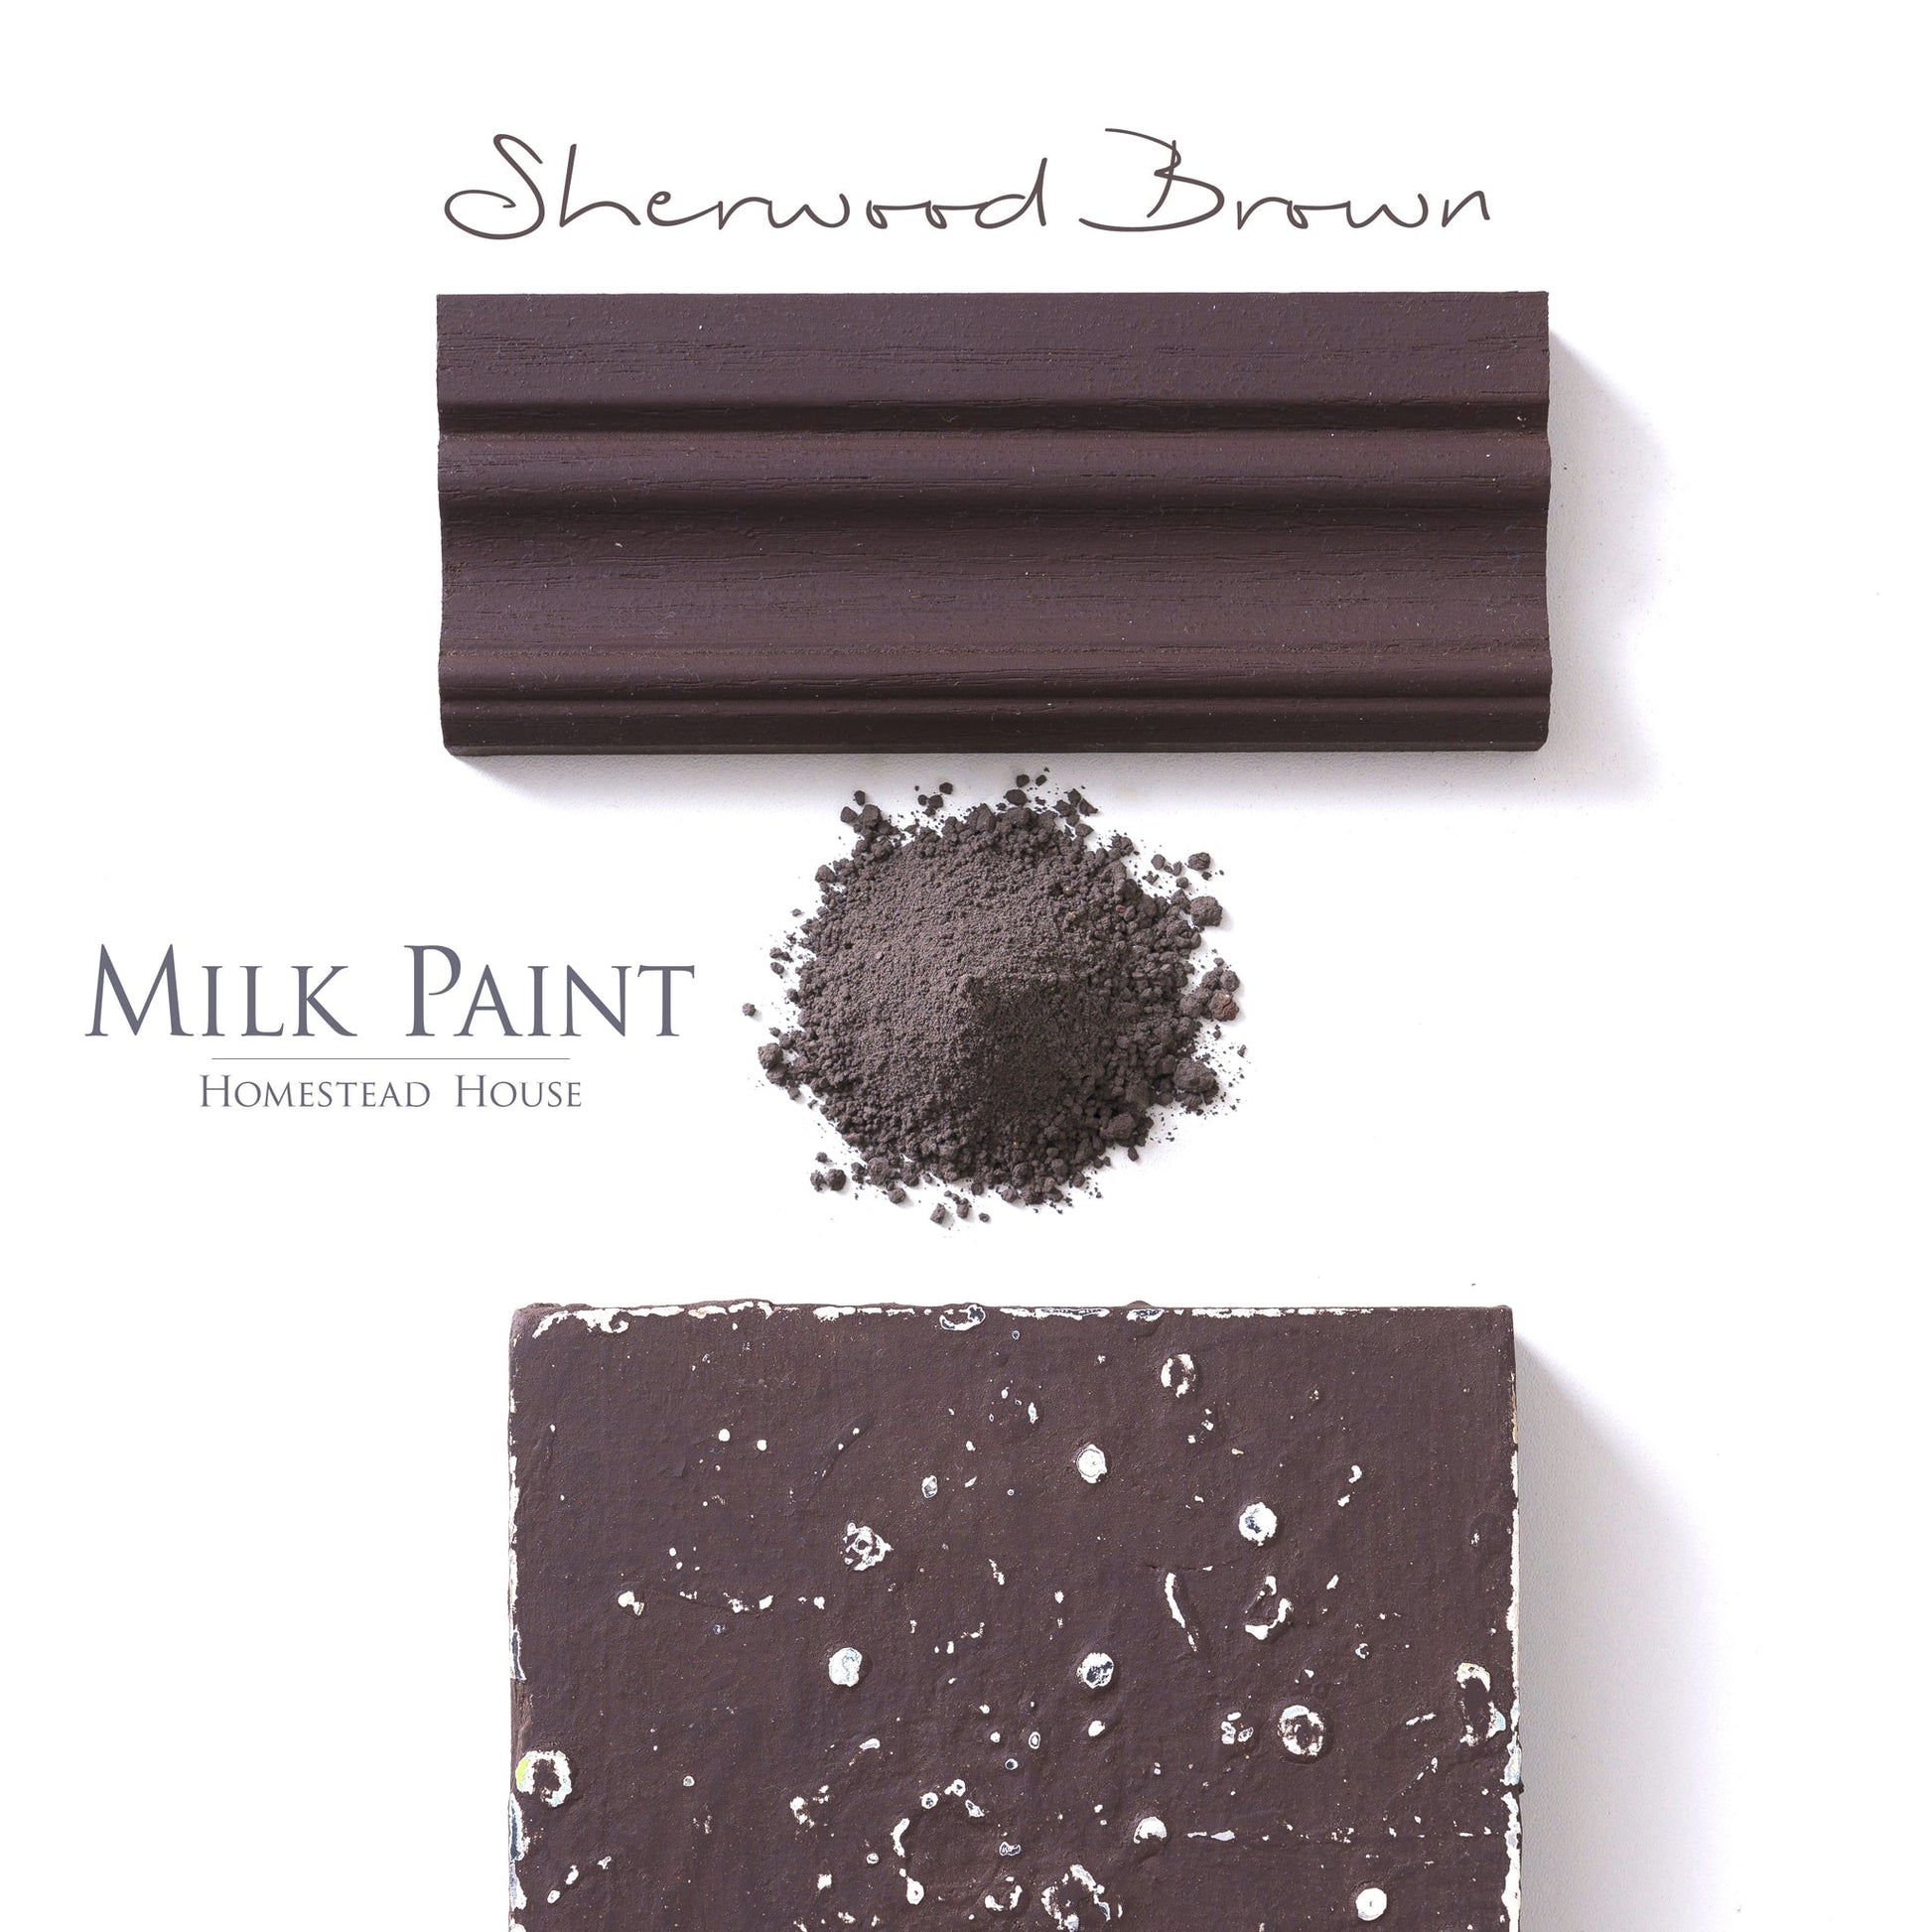 Milk Paint Stain by Homestead House in Sherwood Brown.  |  homesteadhouse.ca